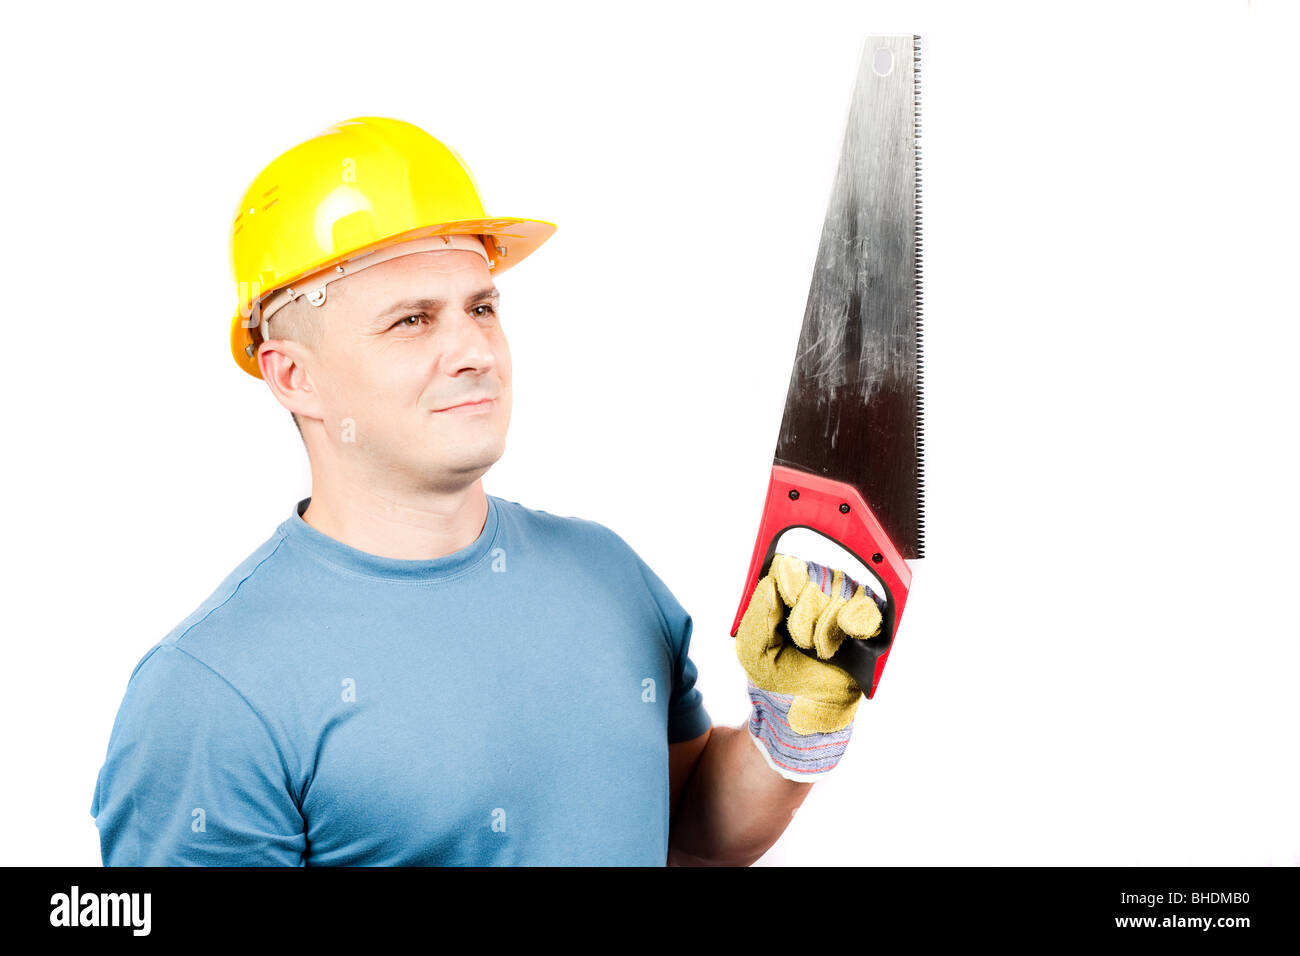 Blue collar worker with yellow helmet and handsaw, isolated on white background Stock Photo